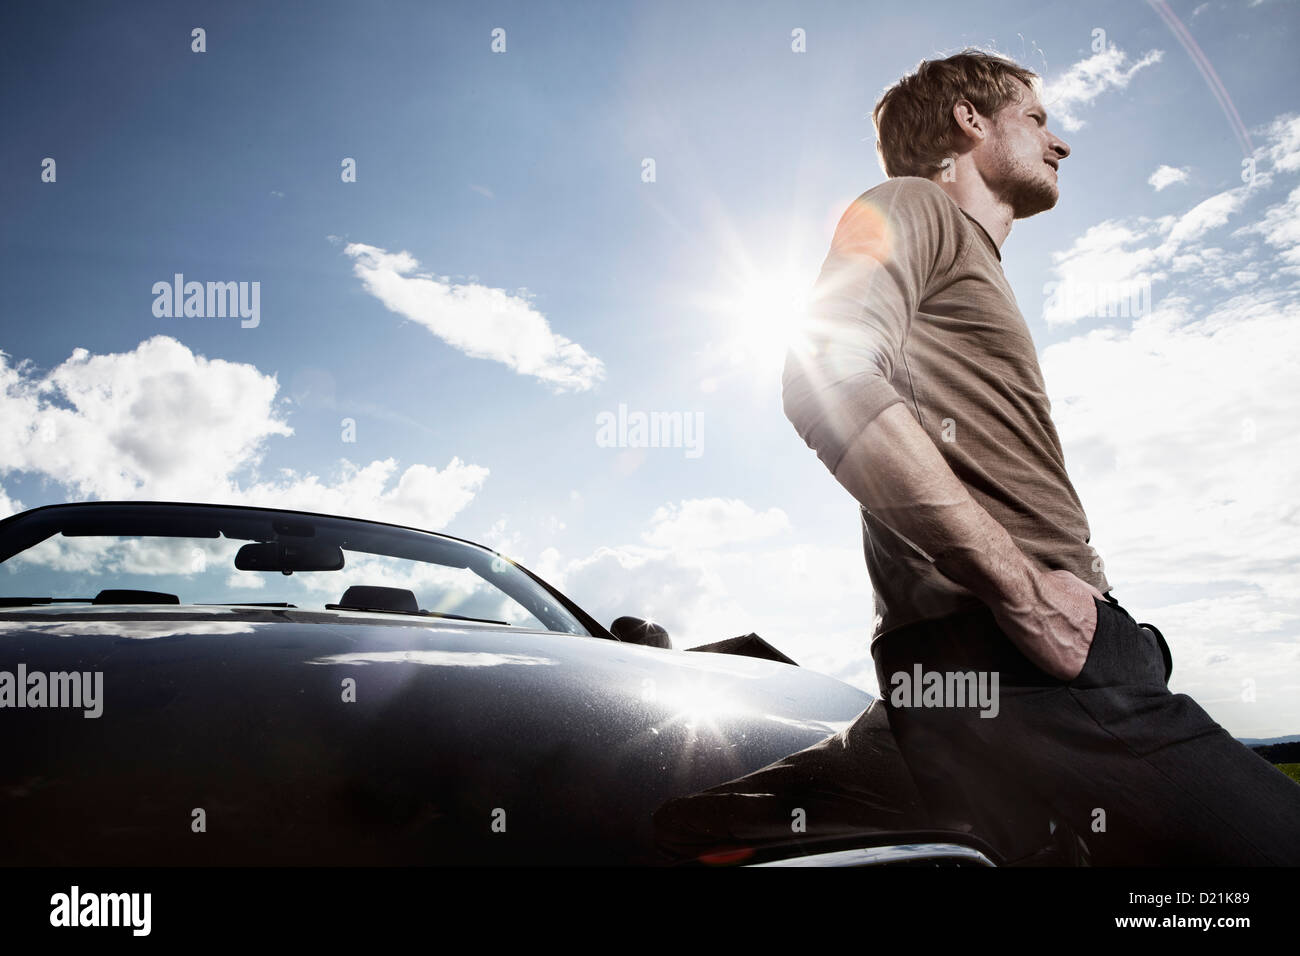 Germany, Bavaria, Mid adult man standing by car Stock Photo